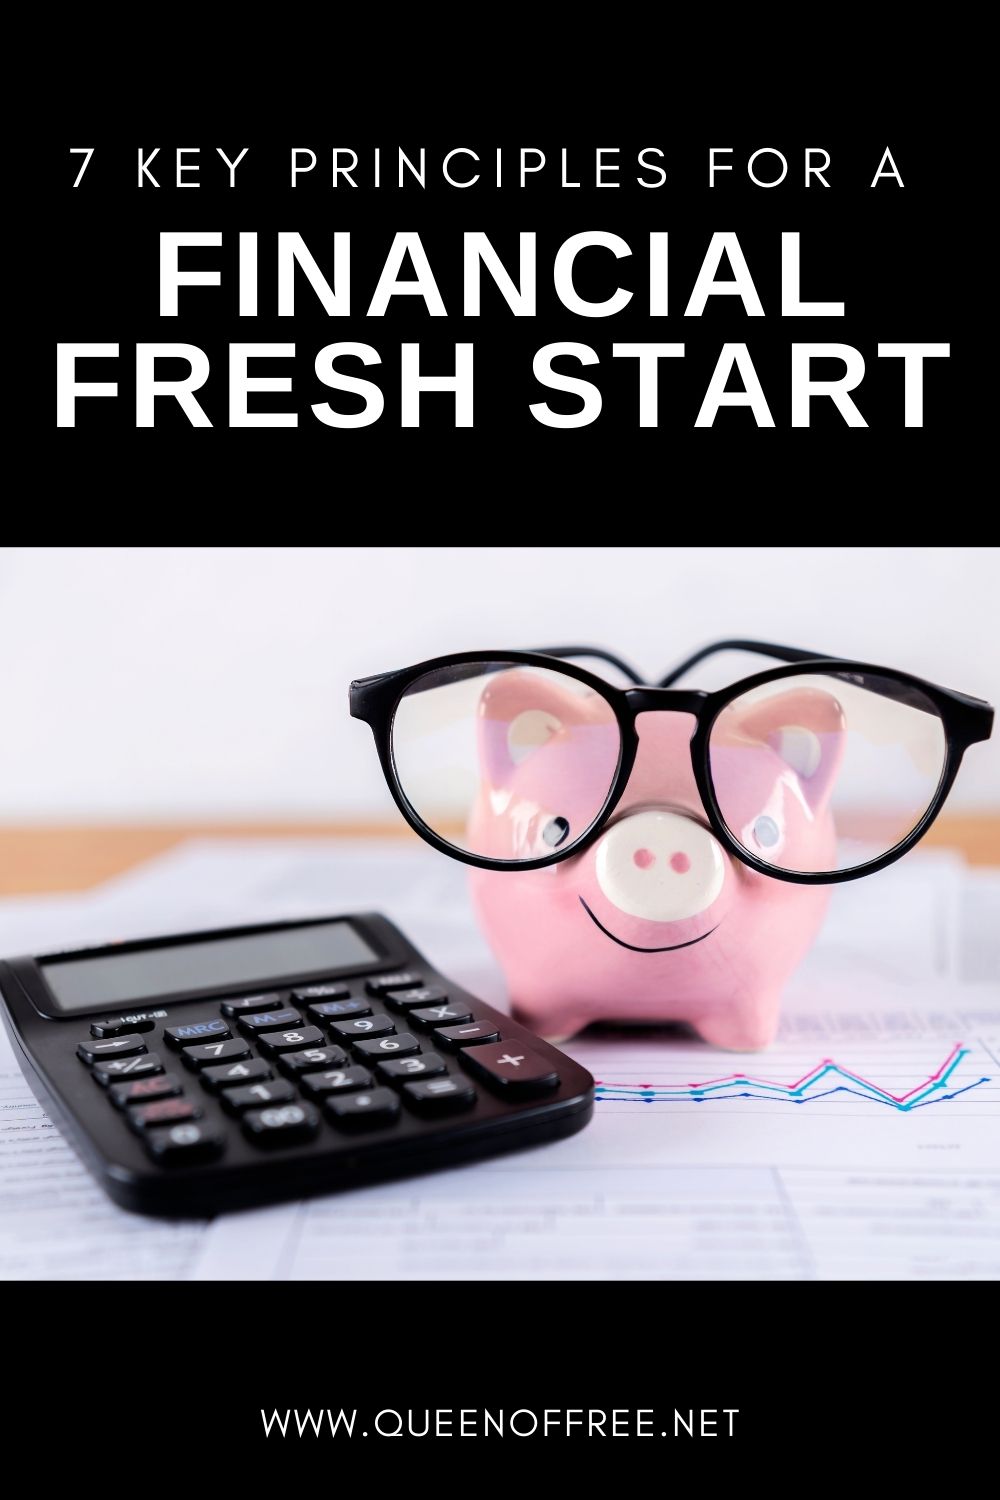 This is your year. These 7 Key Principles for a Financial Fresh Start will help you finally reach your goals in the new year.